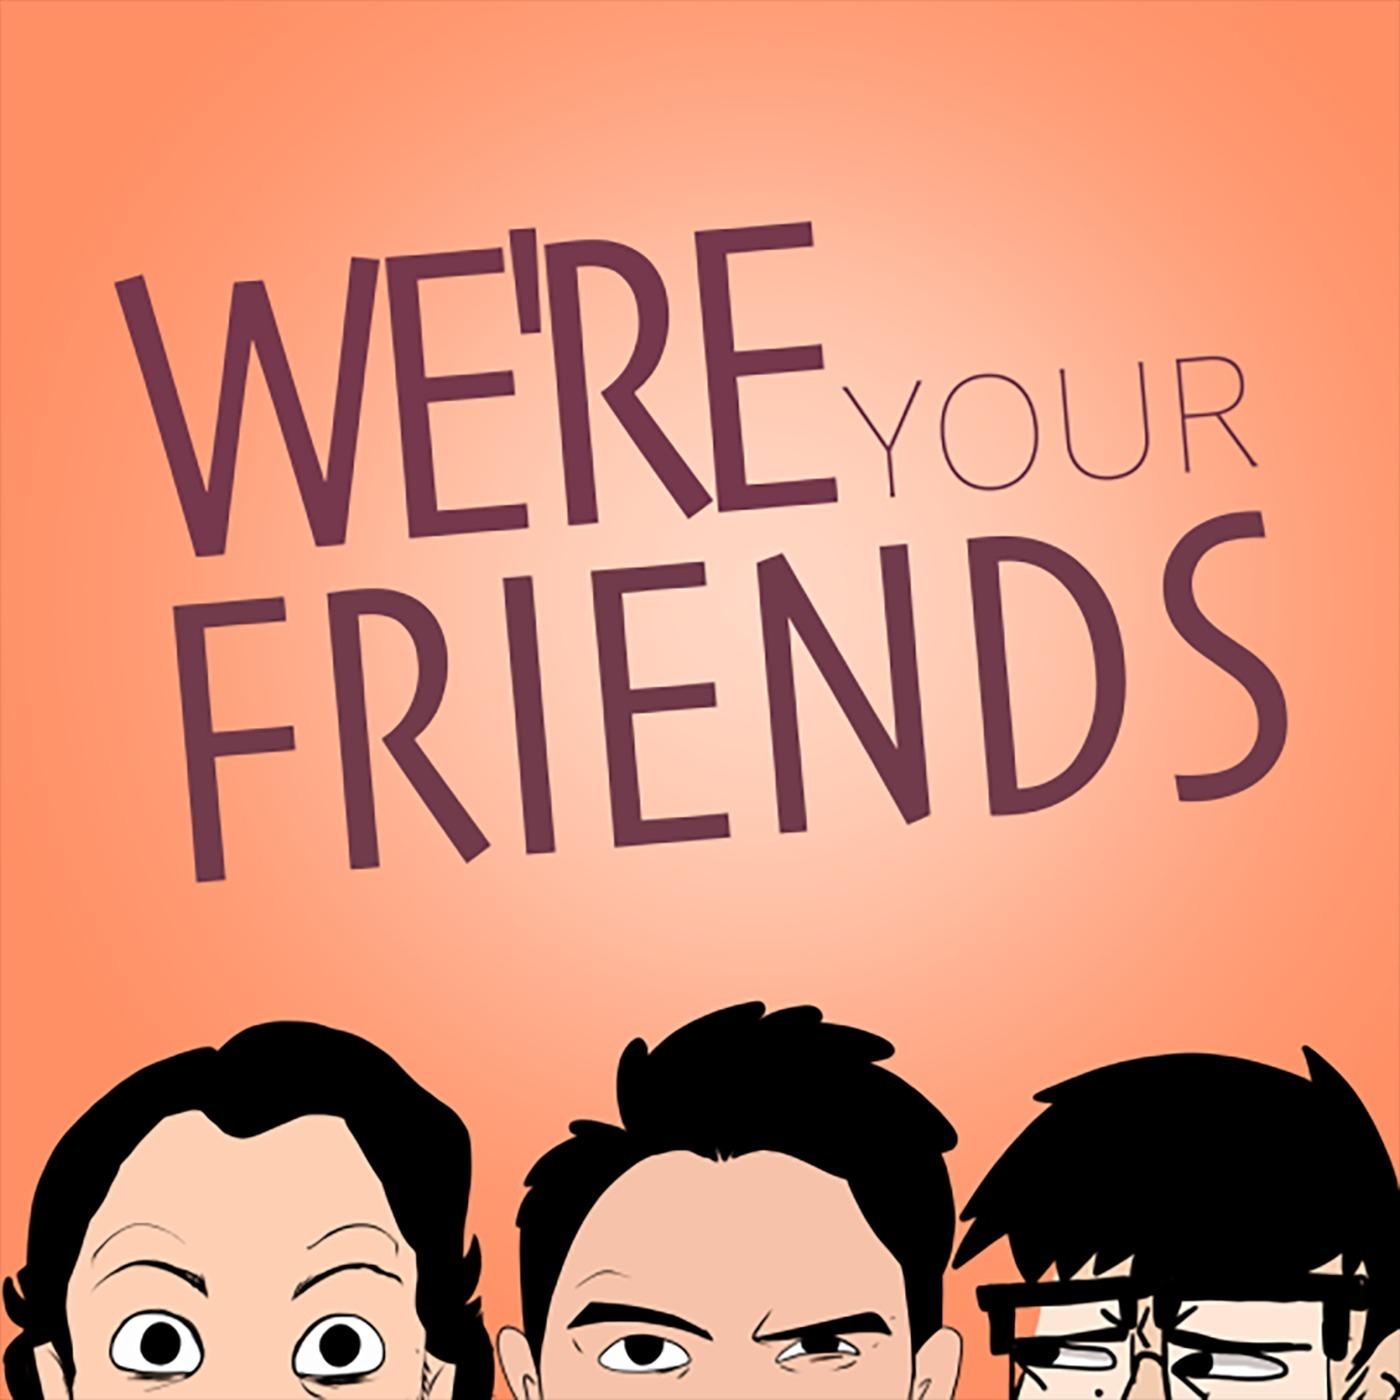 We're Your Friends